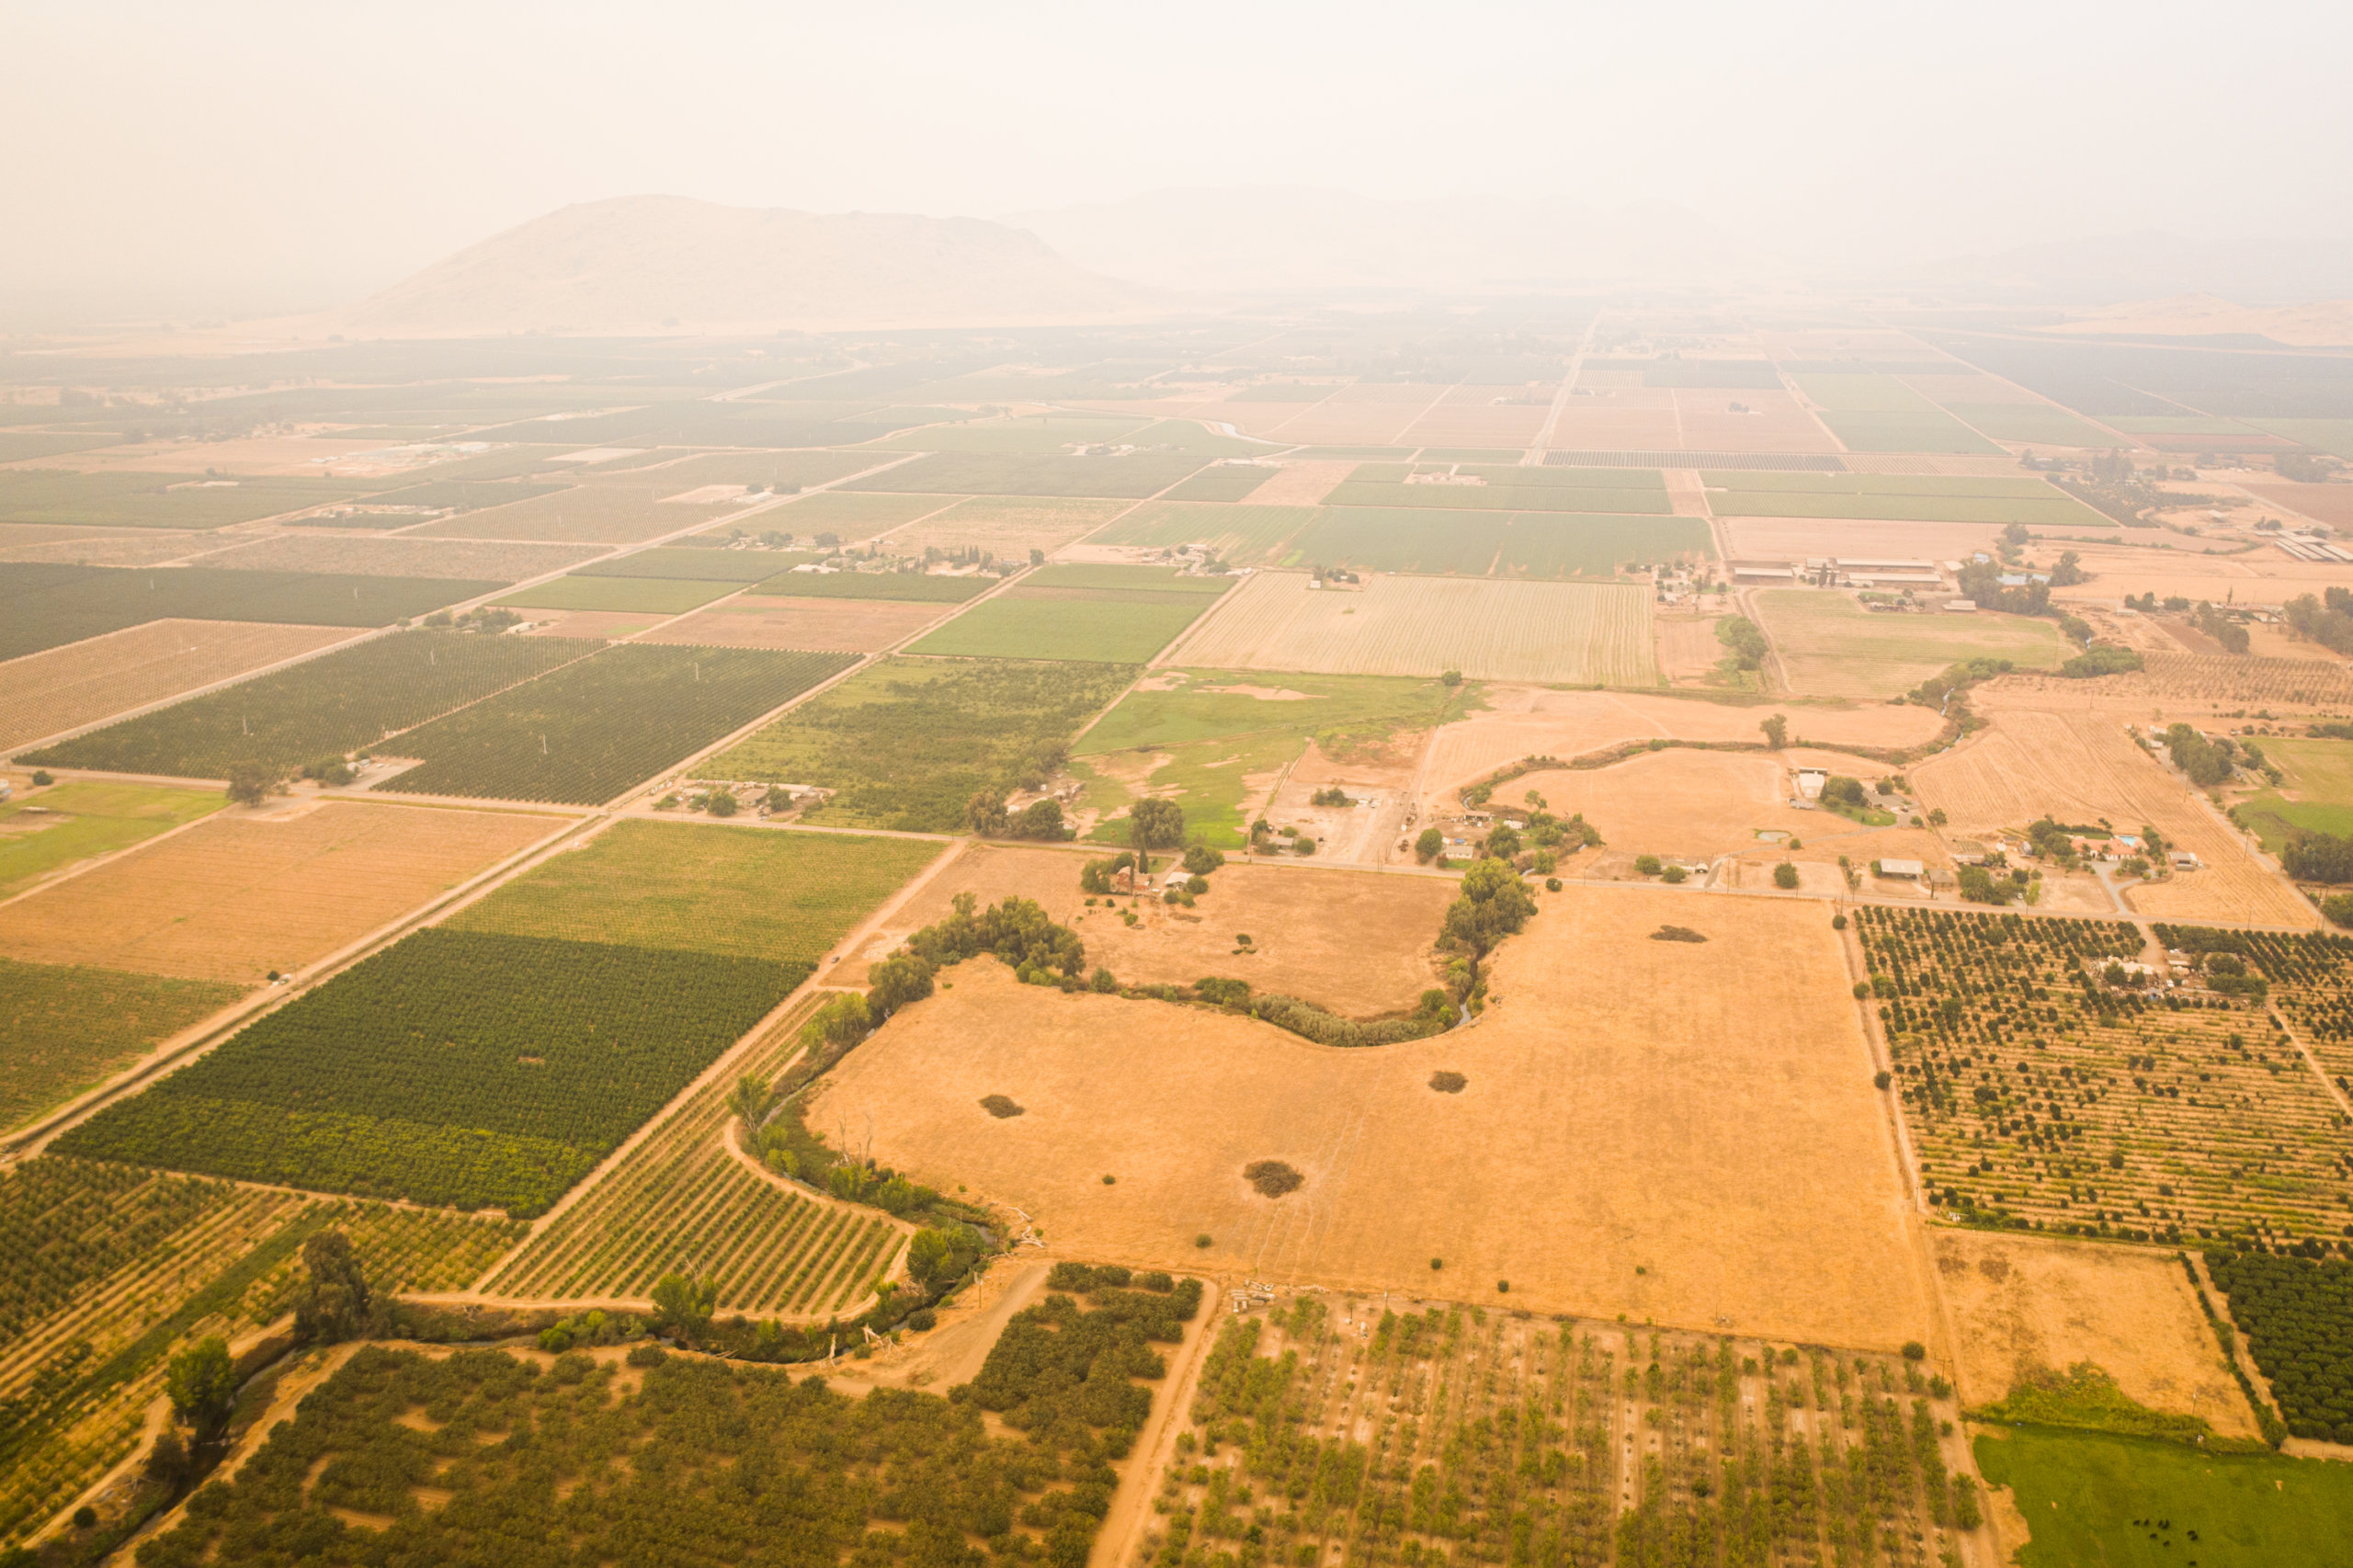 Farms in grids surrounding a river running through the eastern San Joaquin Valley